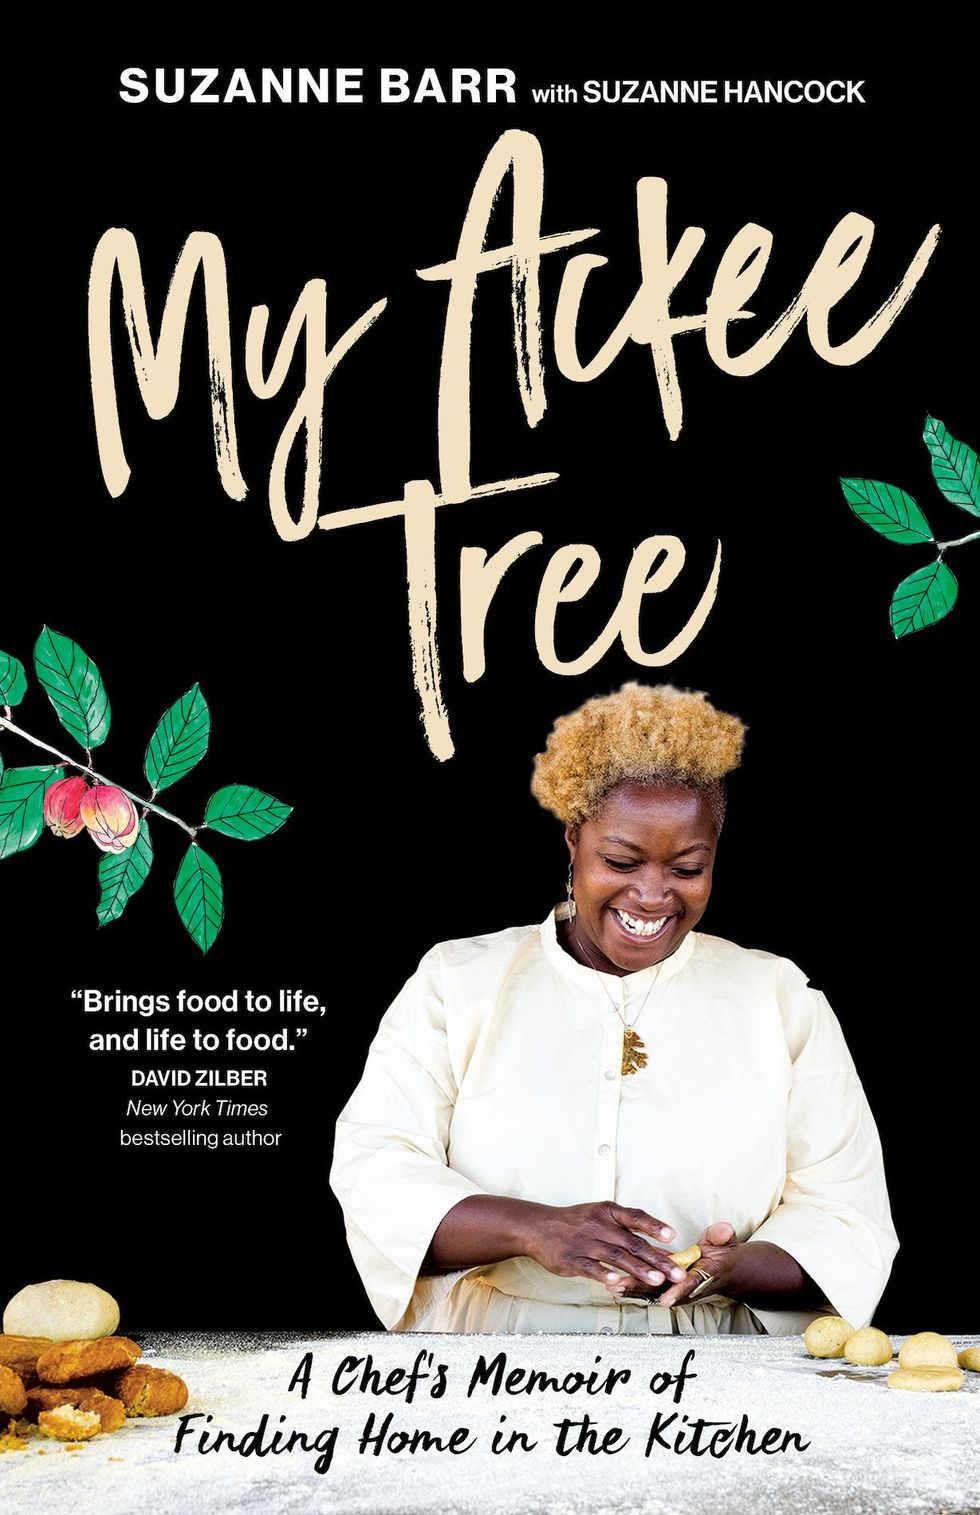 My Ackee Tree by Suzanne Barr cookbook